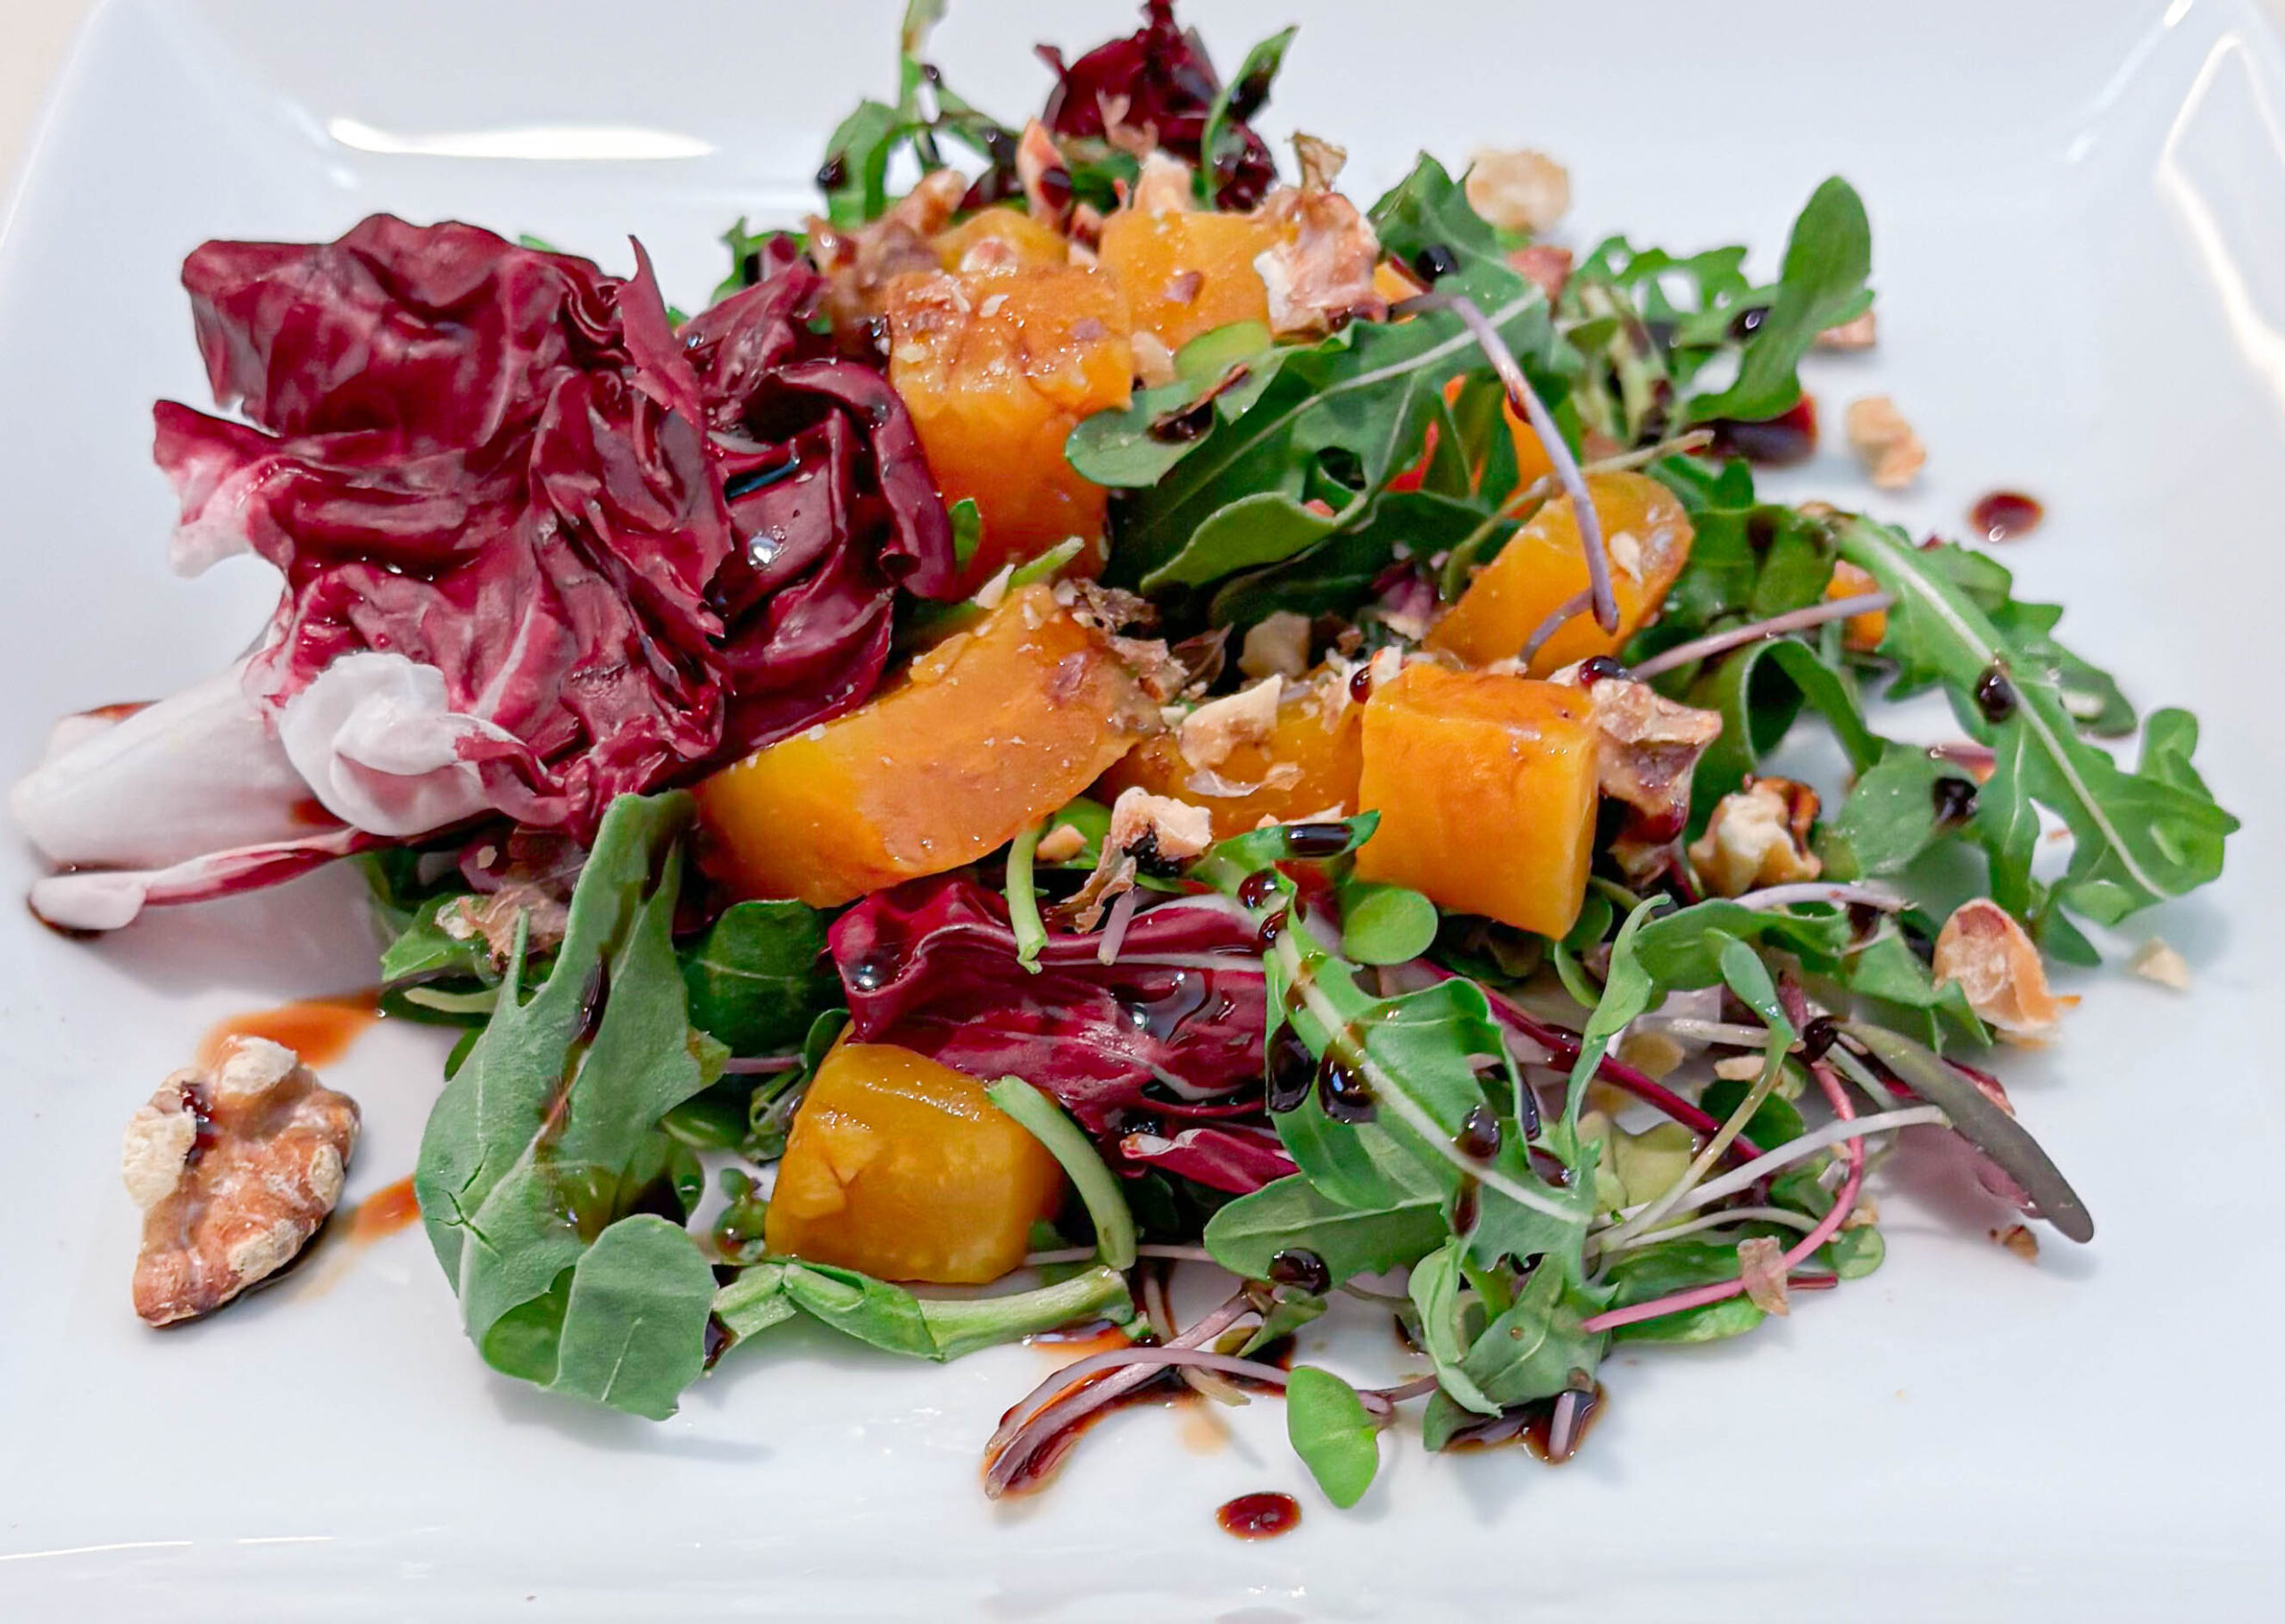 Beet, Walnut and Arugula Salad with a Schmear of Goat Cheese